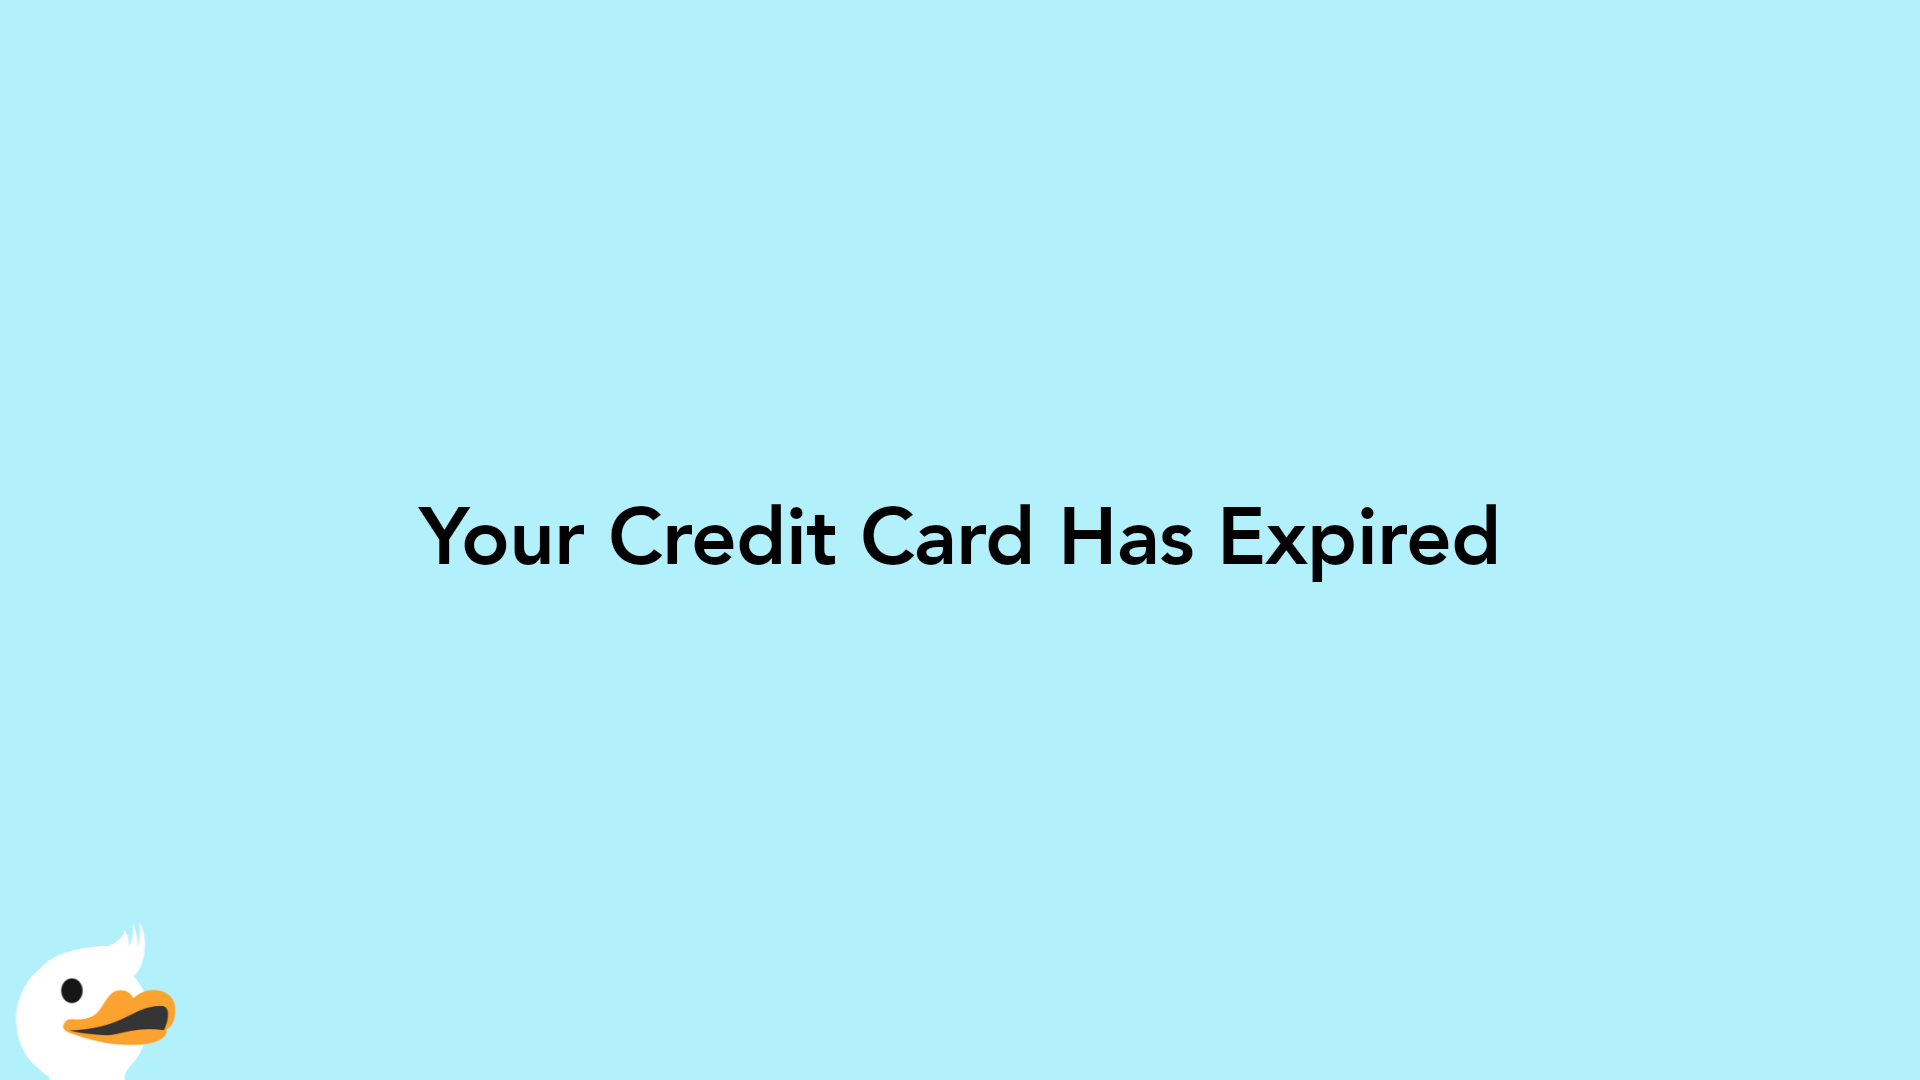 Your Credit Card Has Expired